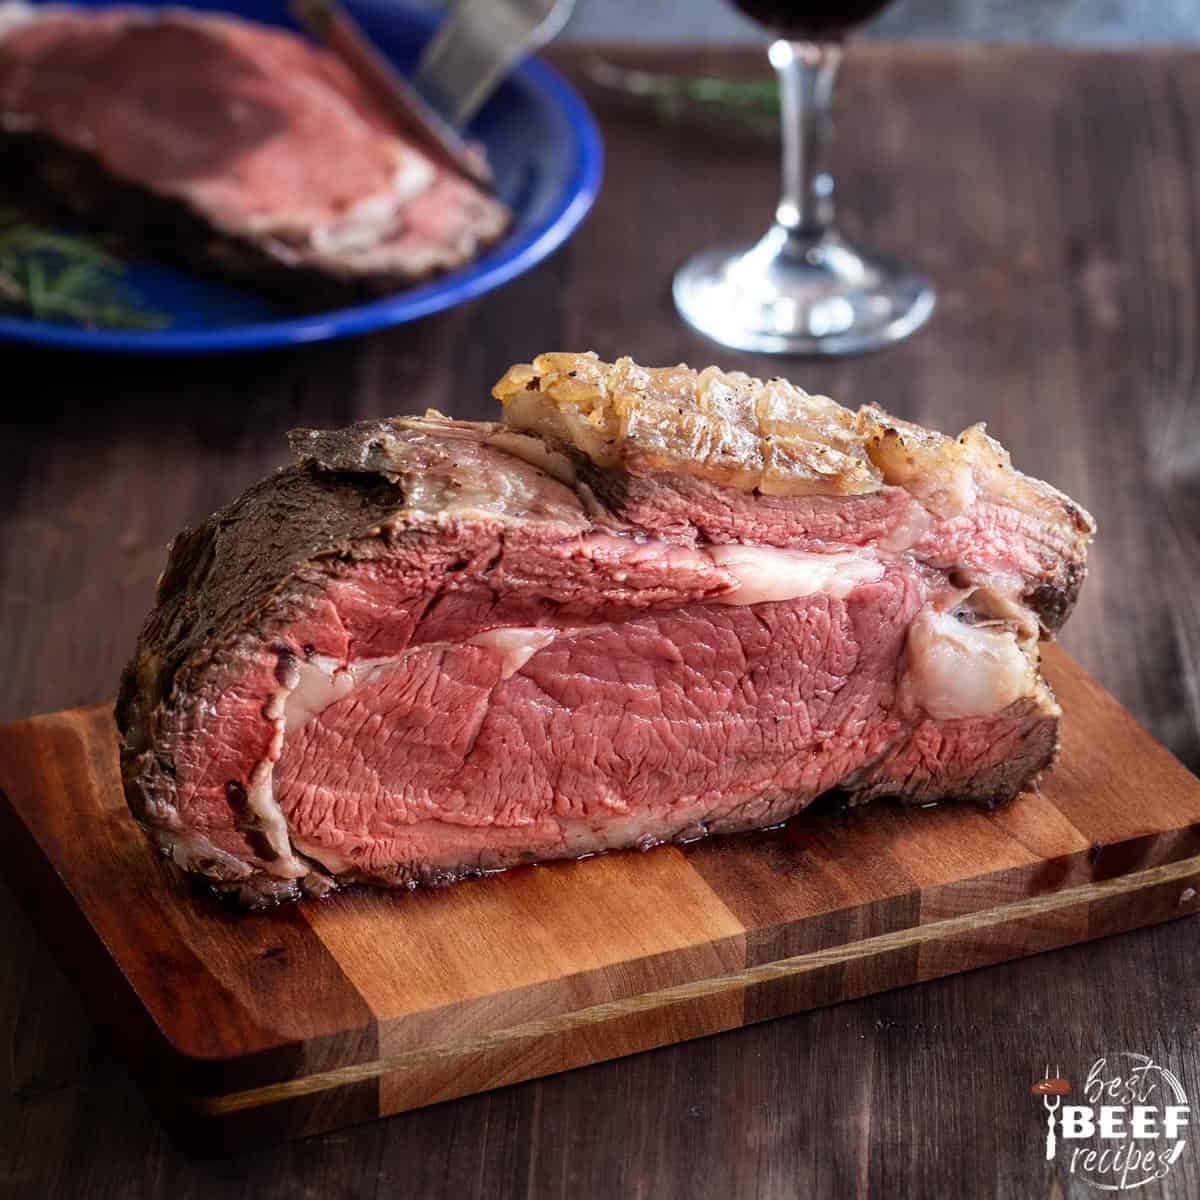 Instant pot prime rib roast on a cutting board in front of a plate of a slice of prime rib